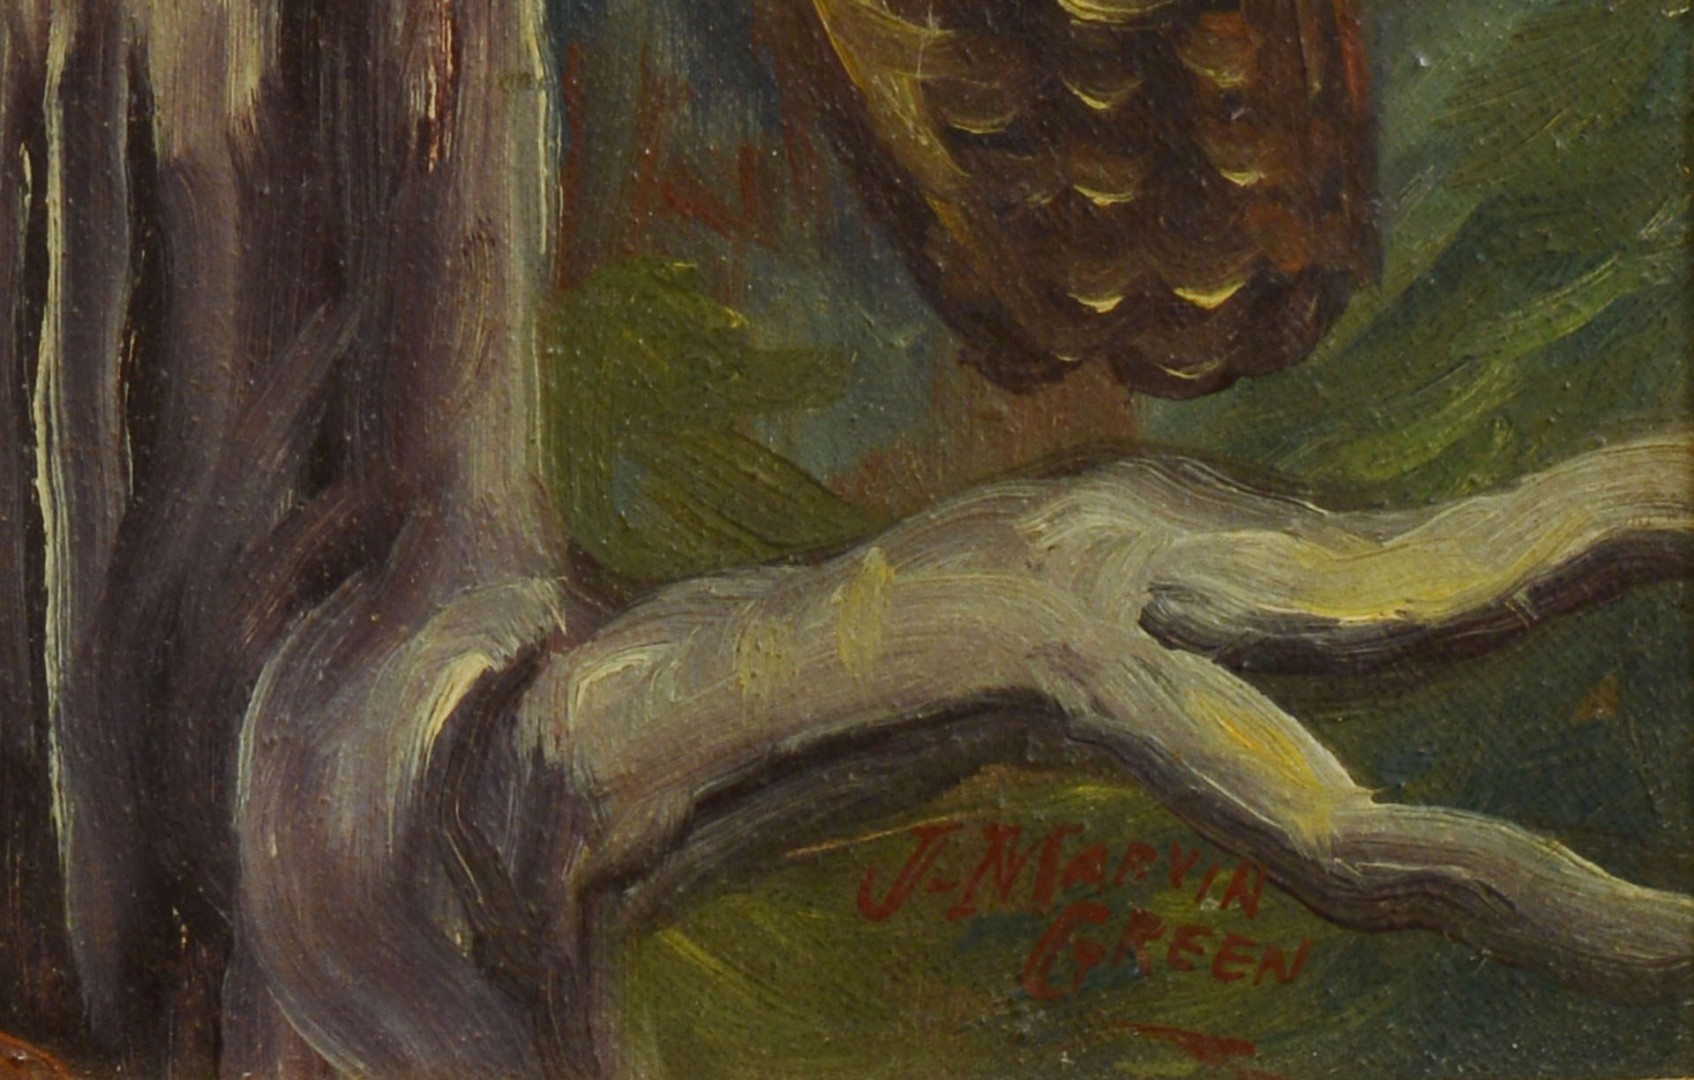 Lot 611: Oil of An Owl Perched in a Tree, J. Marvin Green